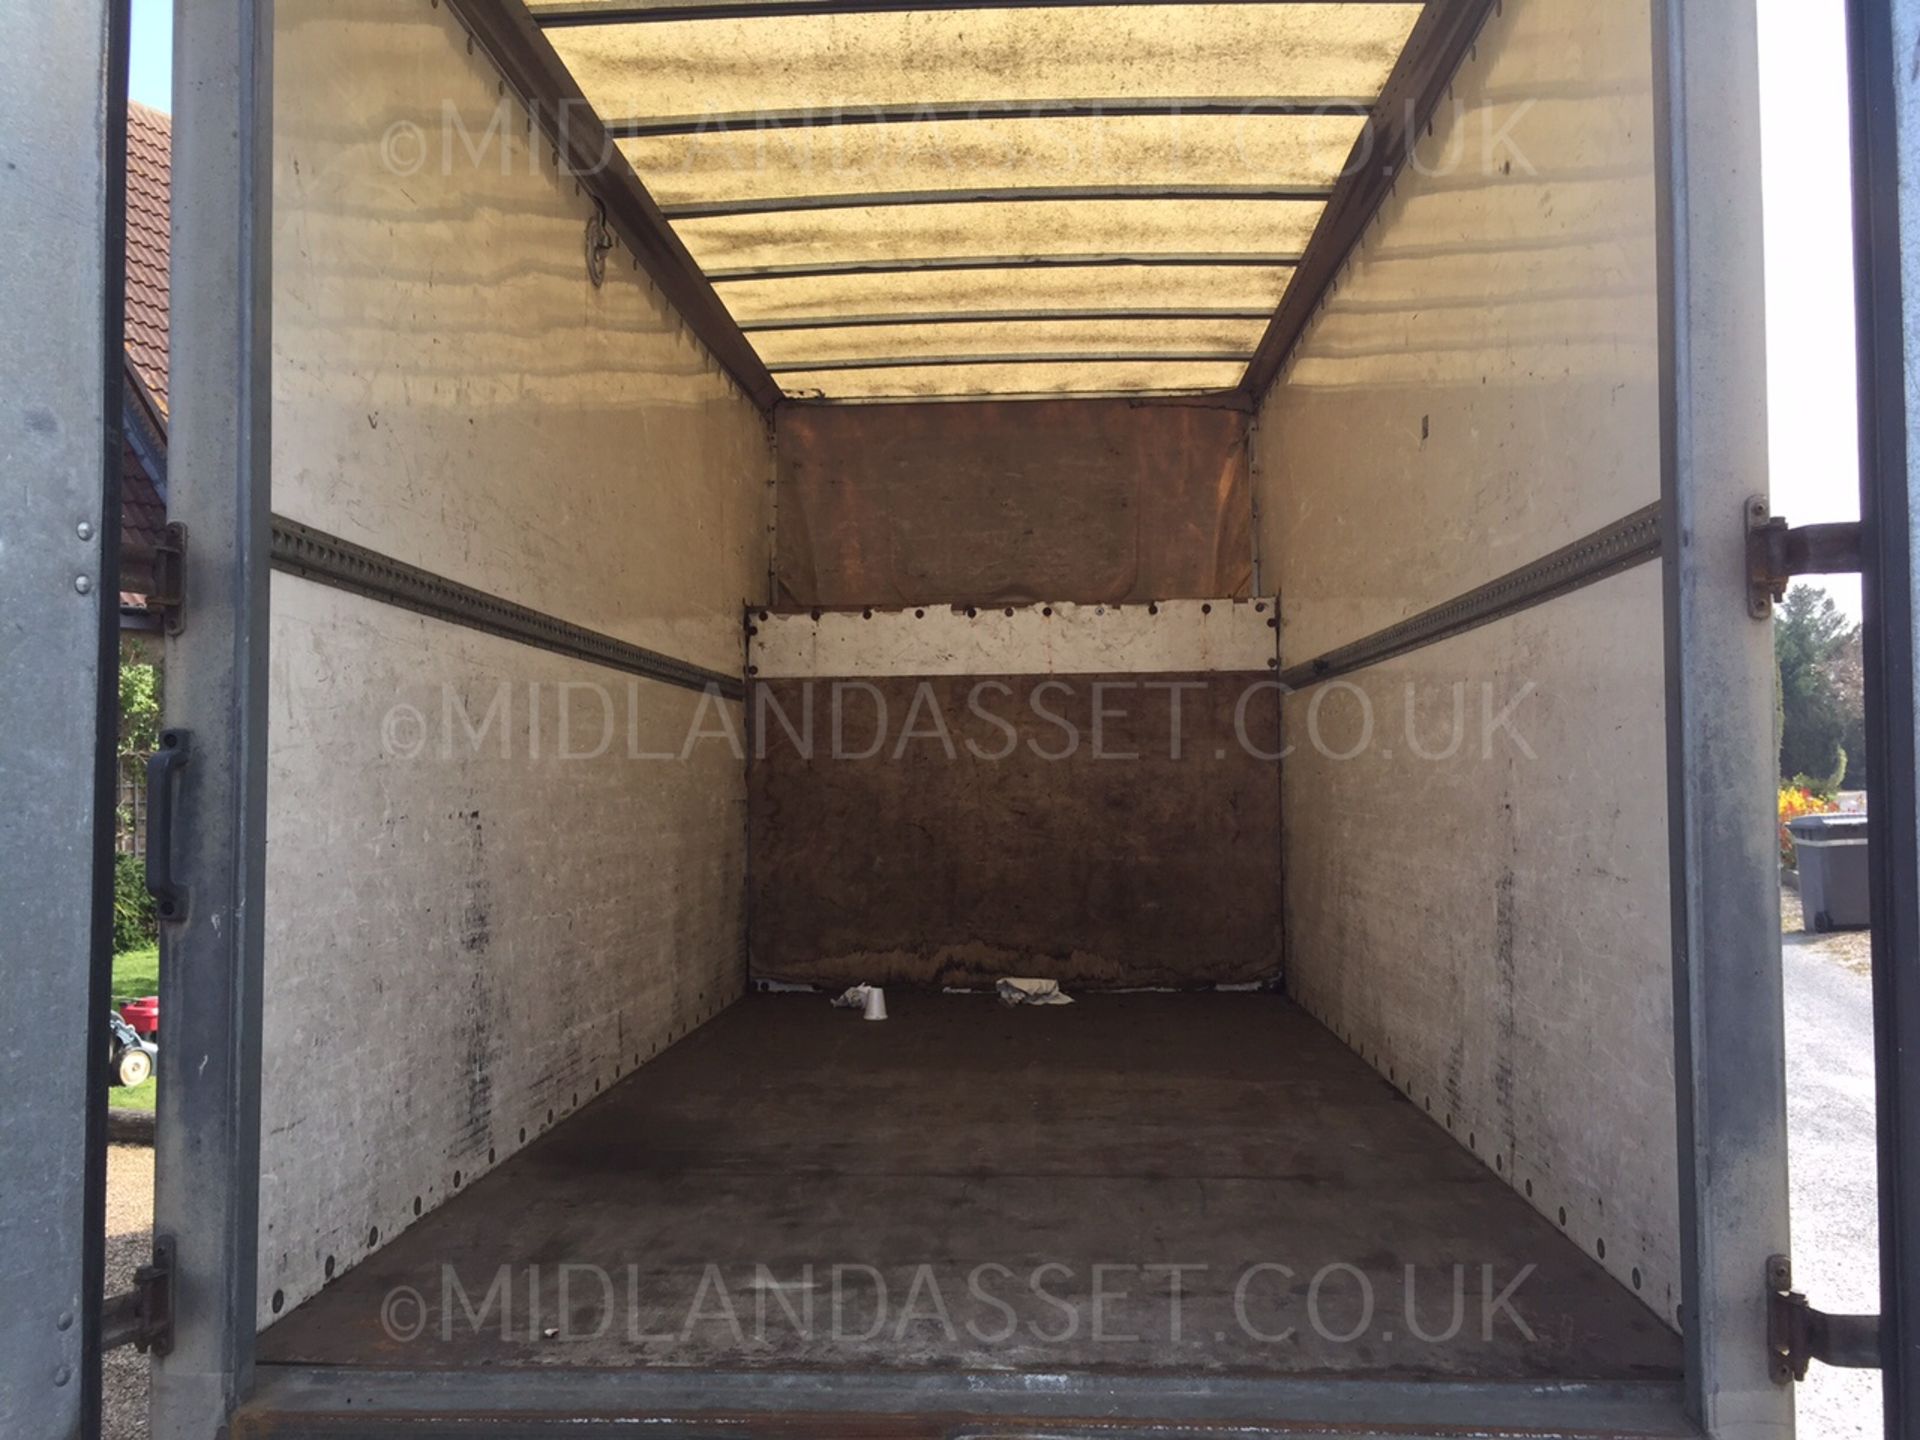 2005/55 REG IVECO DAILY 35C12 LUTON BODY TWIN REAR AXLE COMPANY DIRECT *NO VAT* - Image 8 of 10